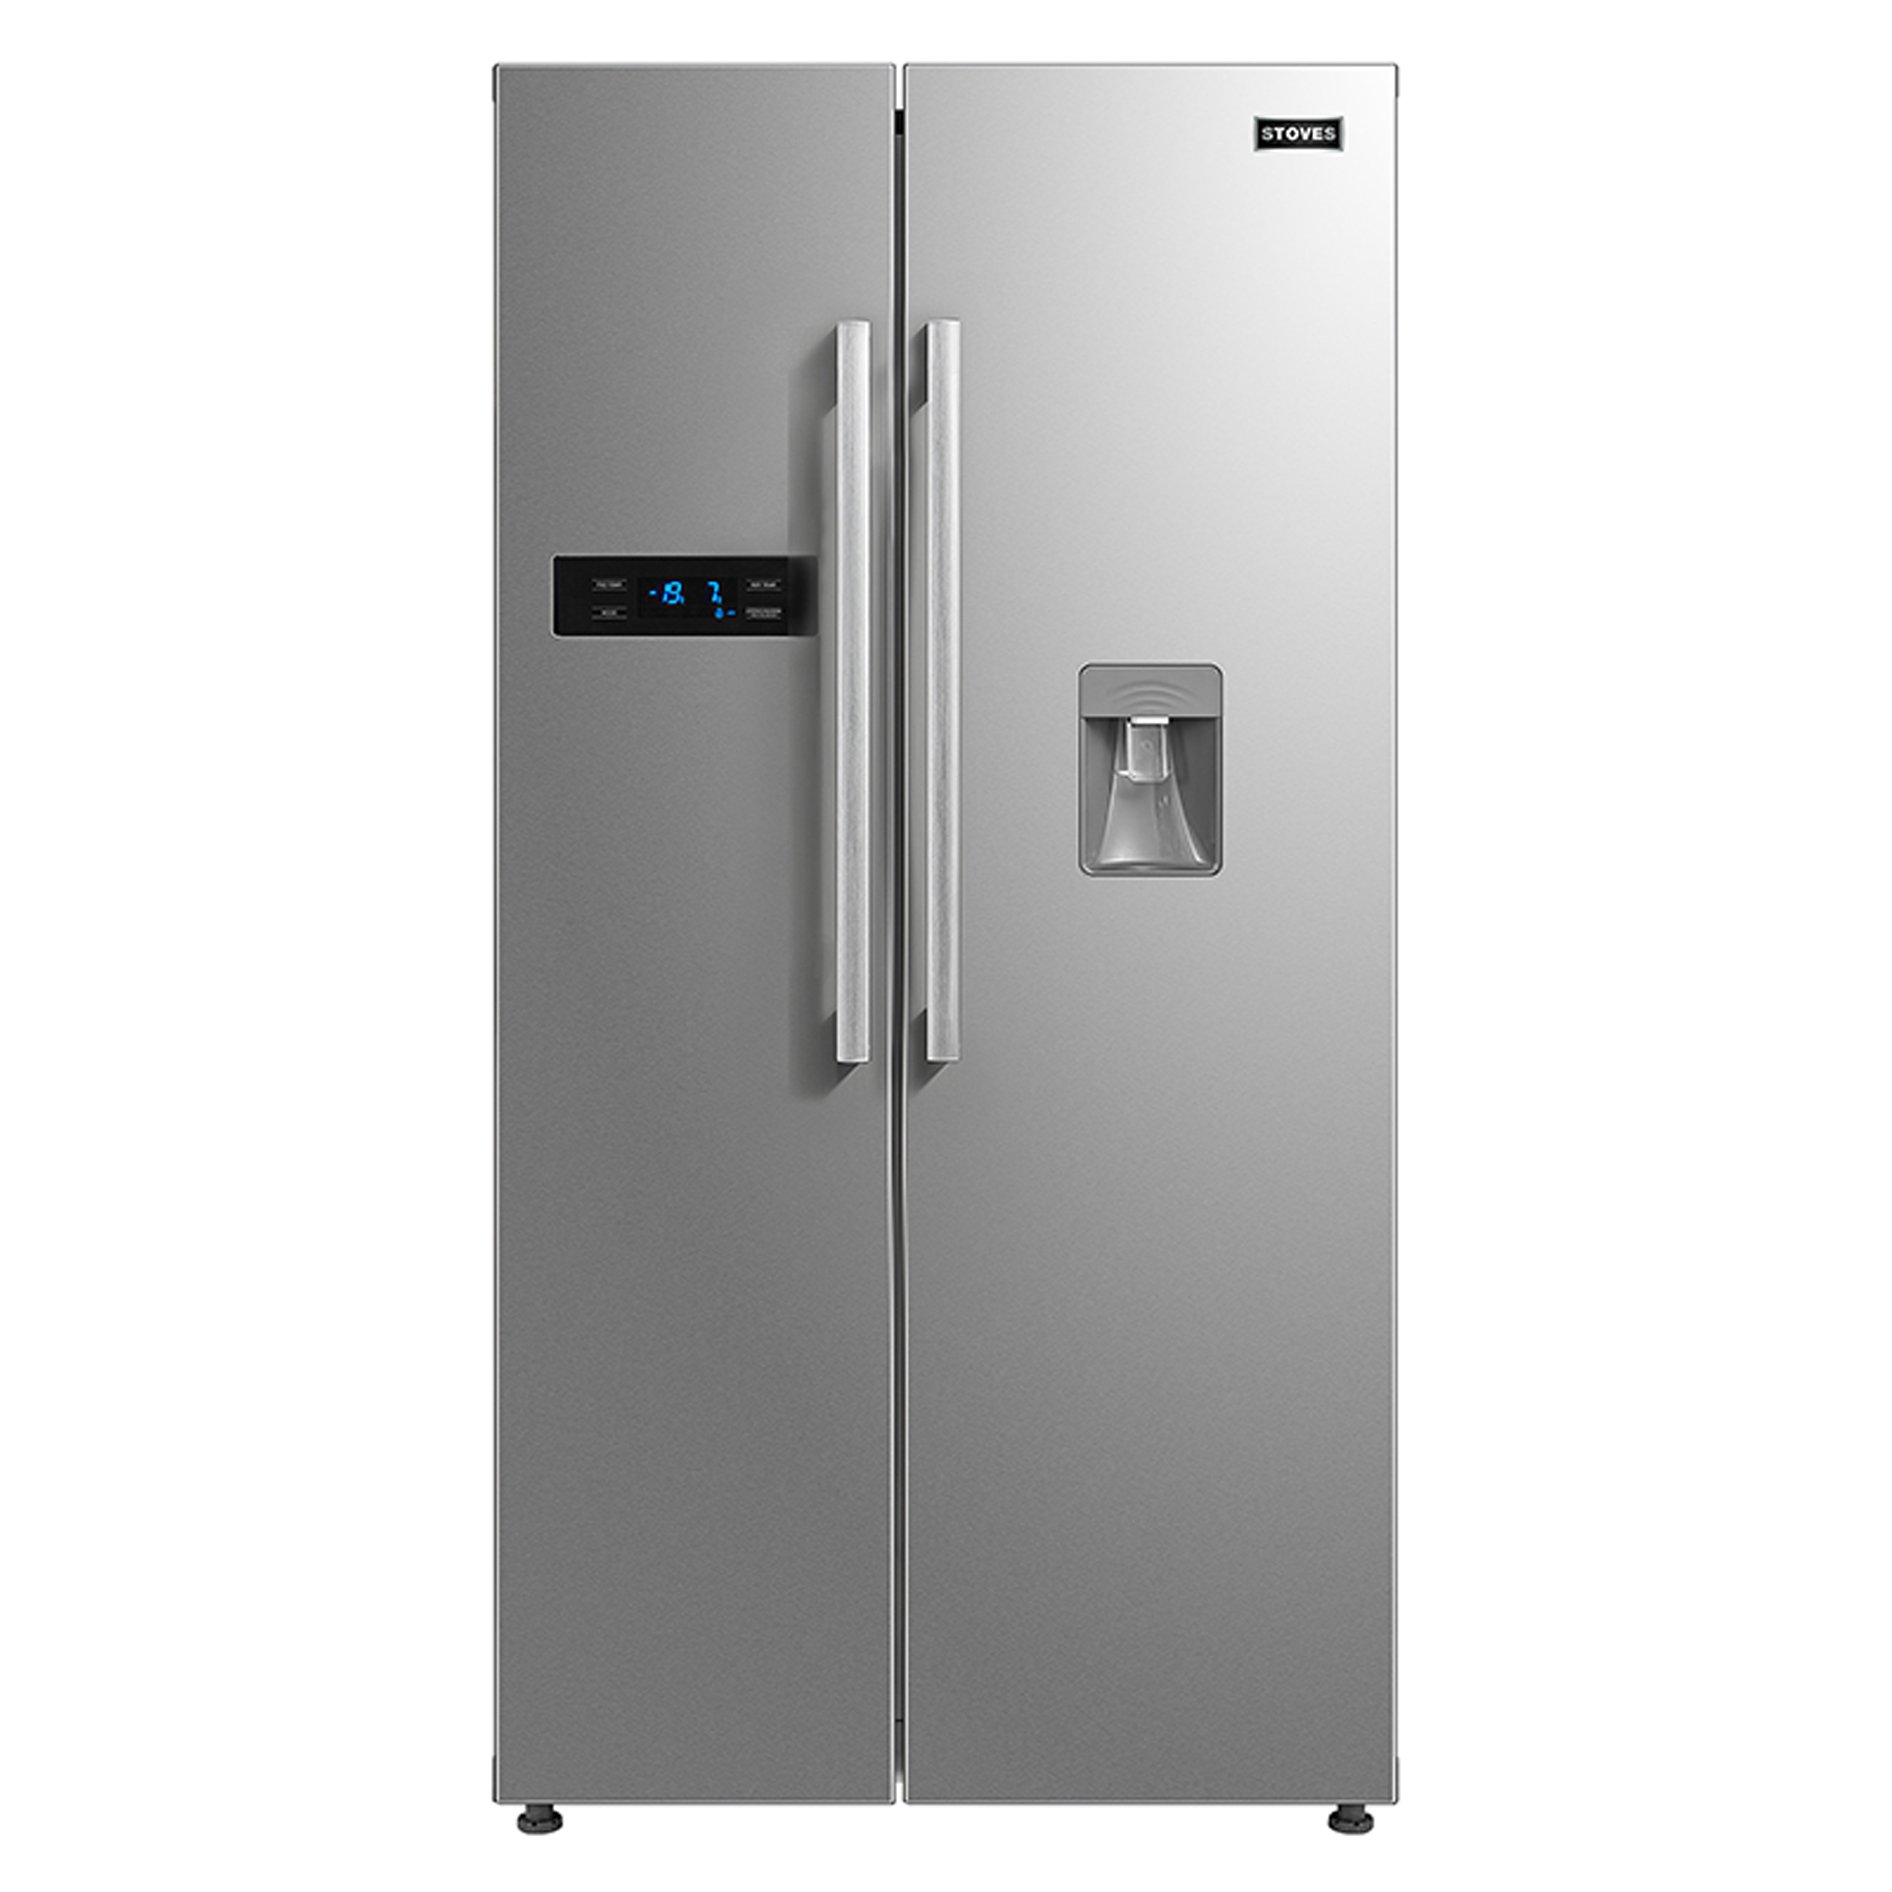 American Style fridge freezer, with gross fridge capacity of 343L & freezer capacity of 248L. Features include non-plumbed water through door, total no frost, and digital control